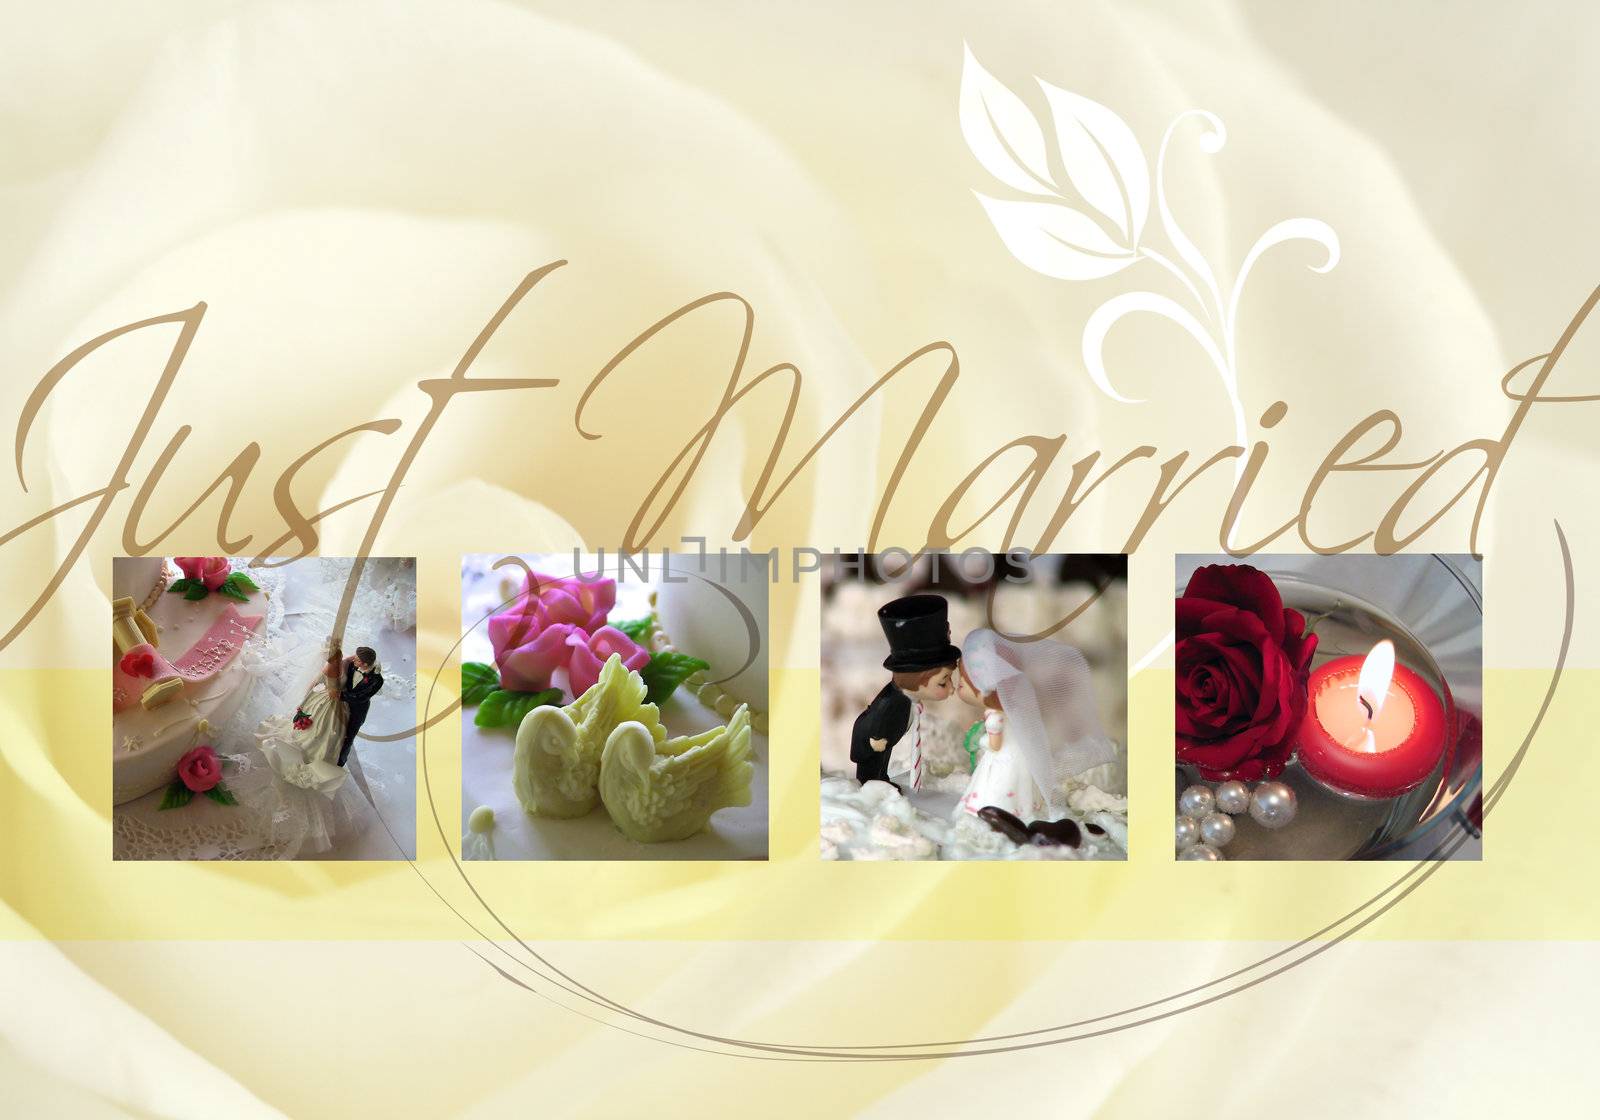 Just married card with bride, bridegroom and rose